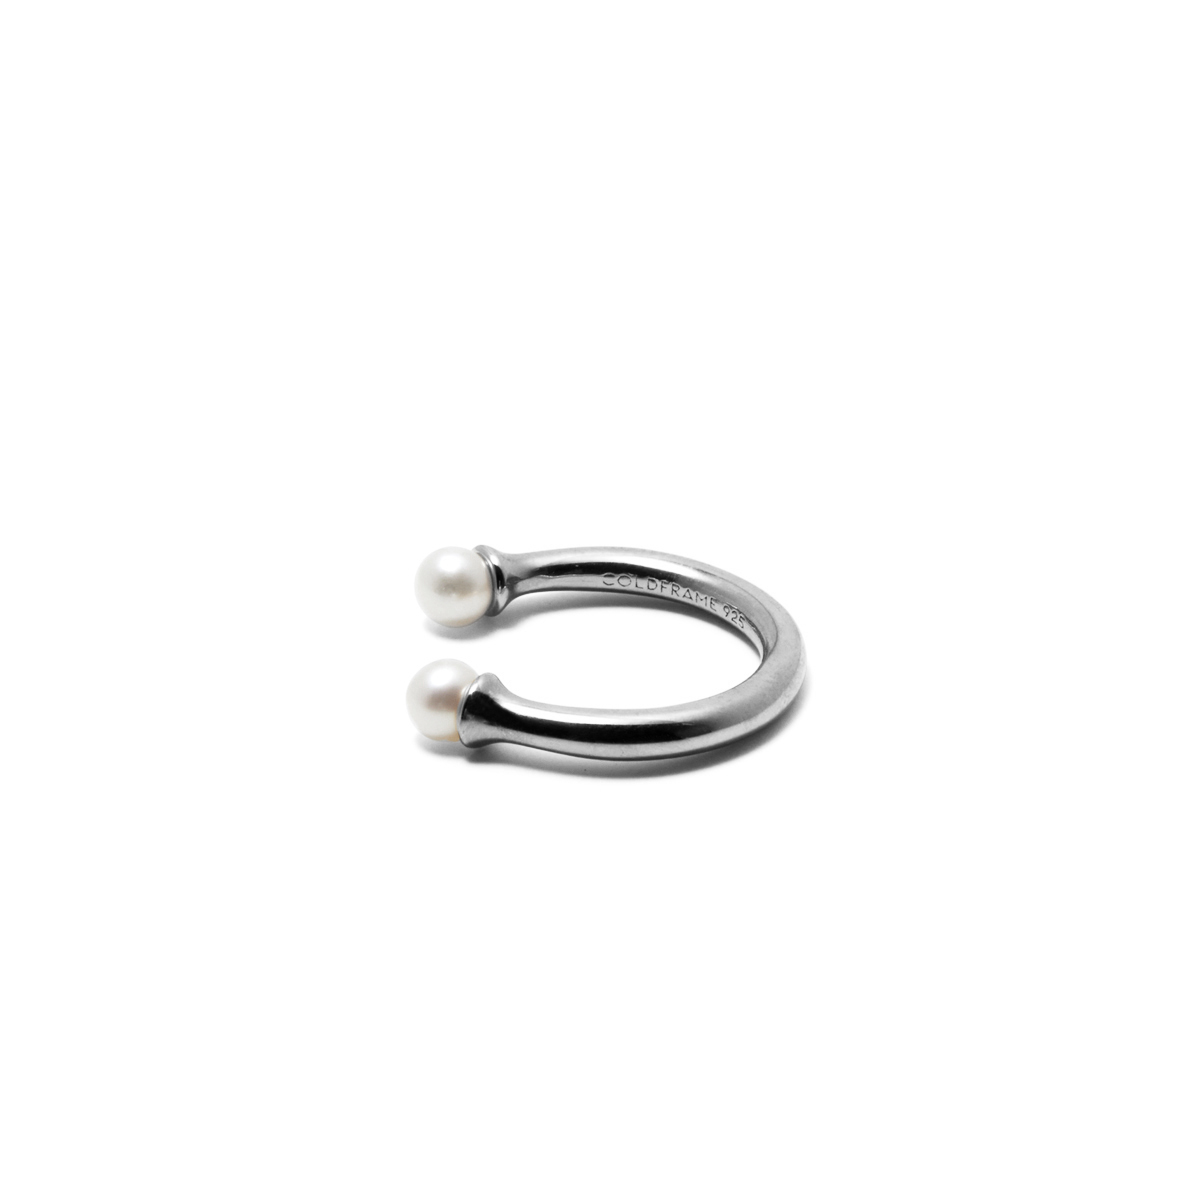 COLD WHITE 4mm DOUBLE PEARL OPEN RING